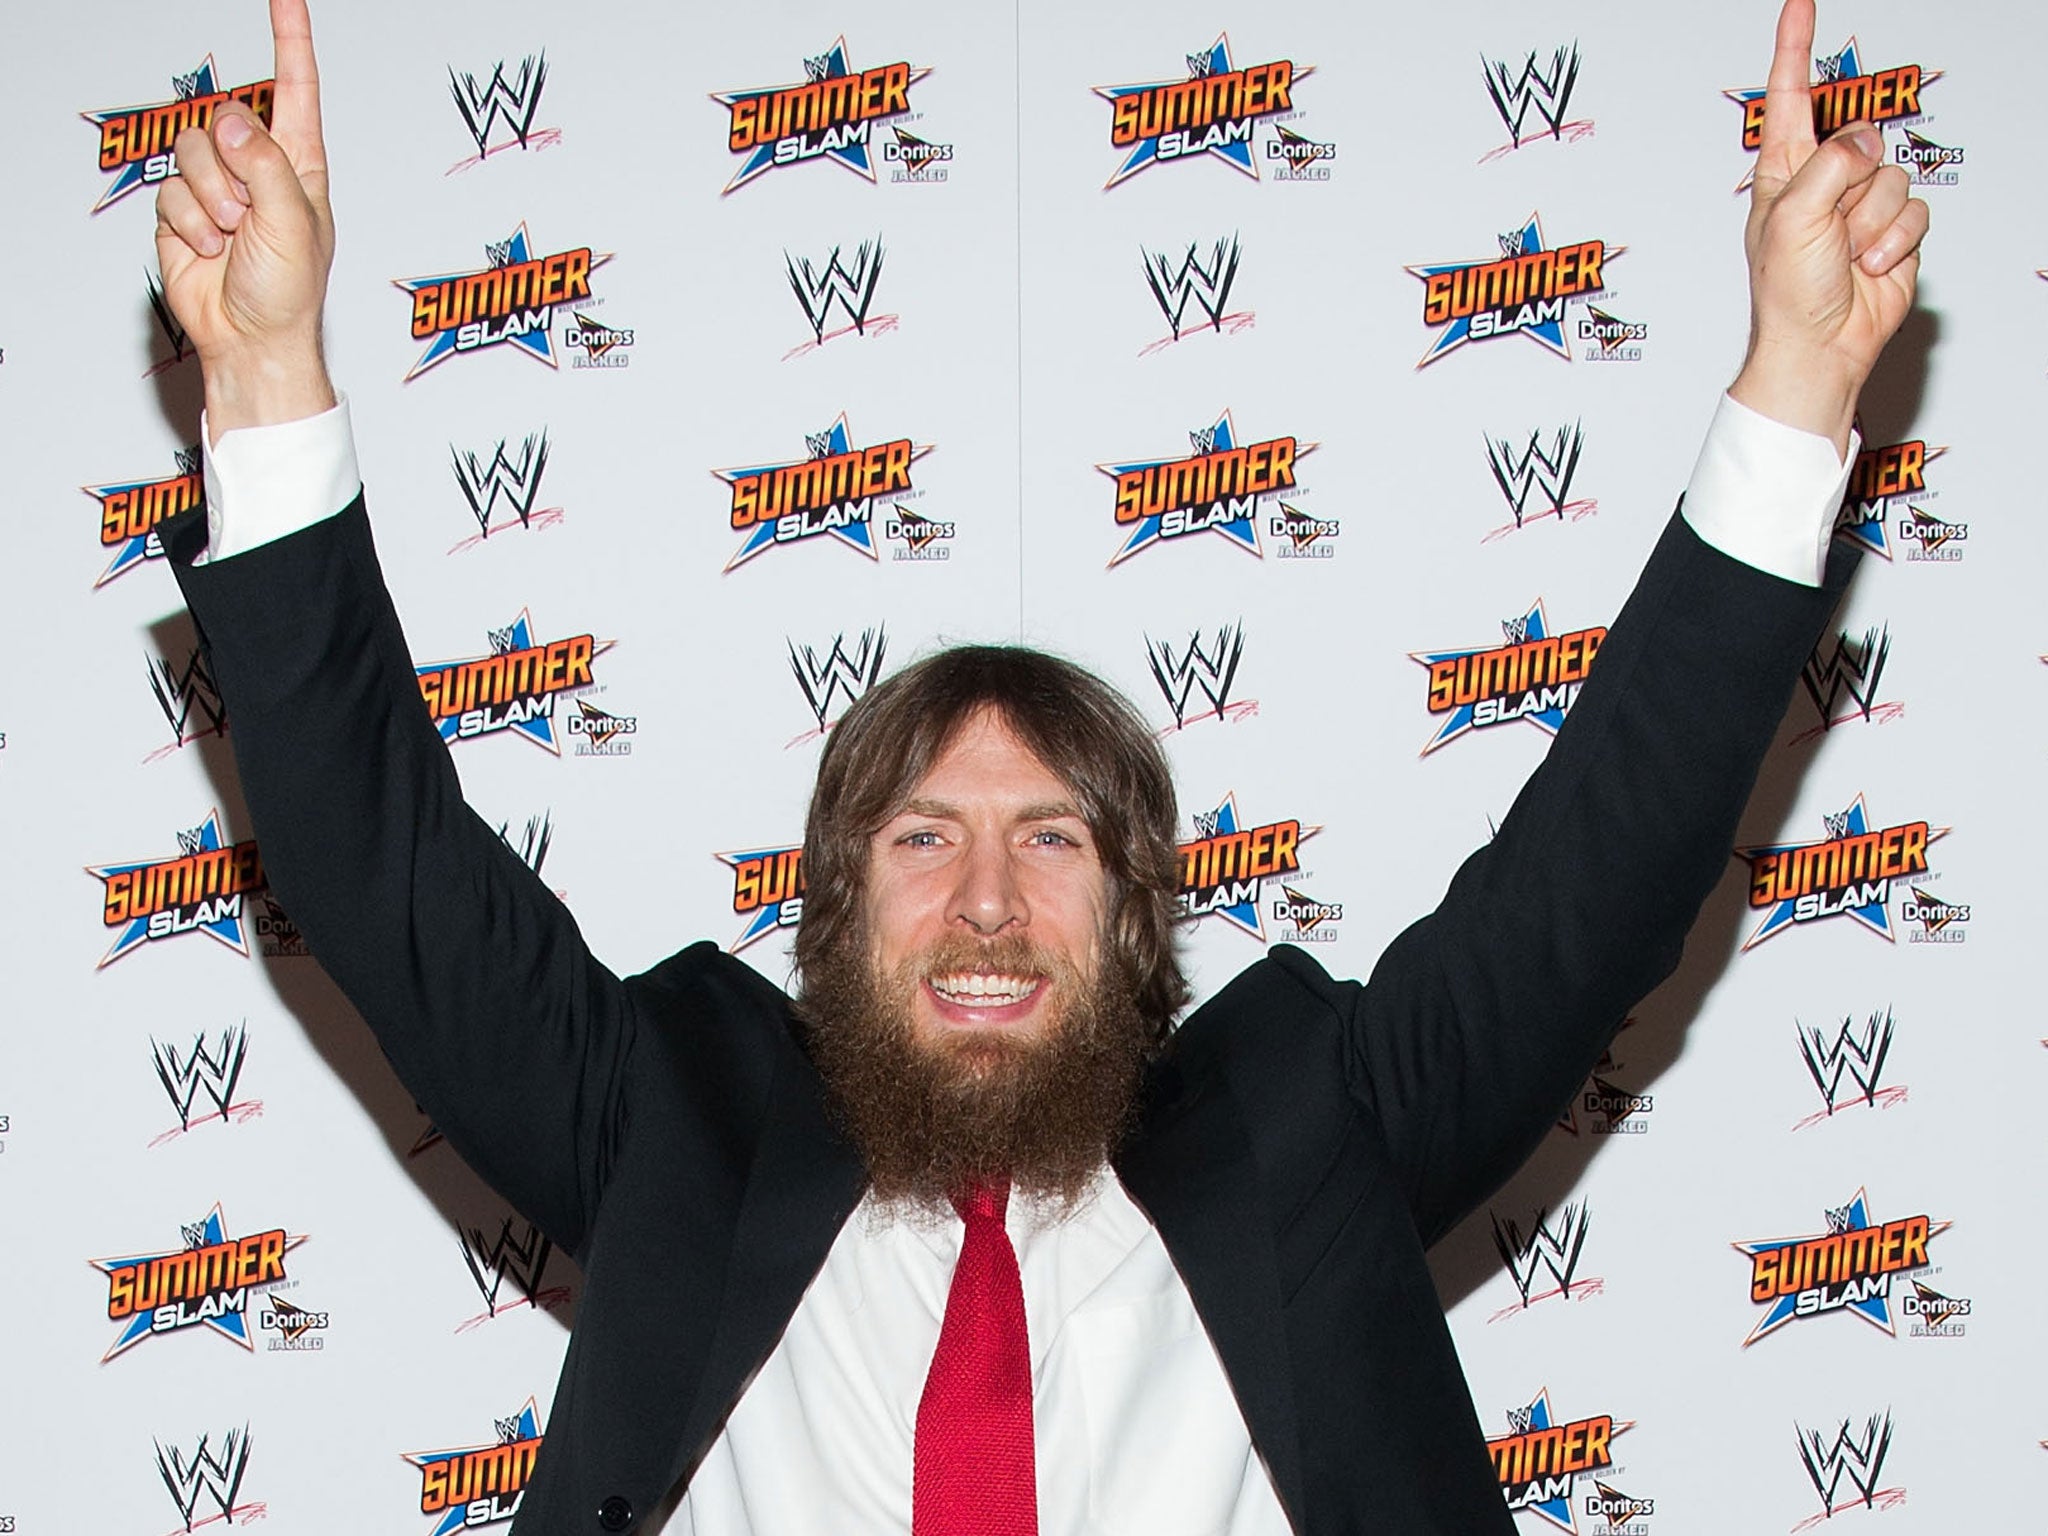 Daniel Bryan makes his signature 'YES!' chant at the SummerSlam press conference last year